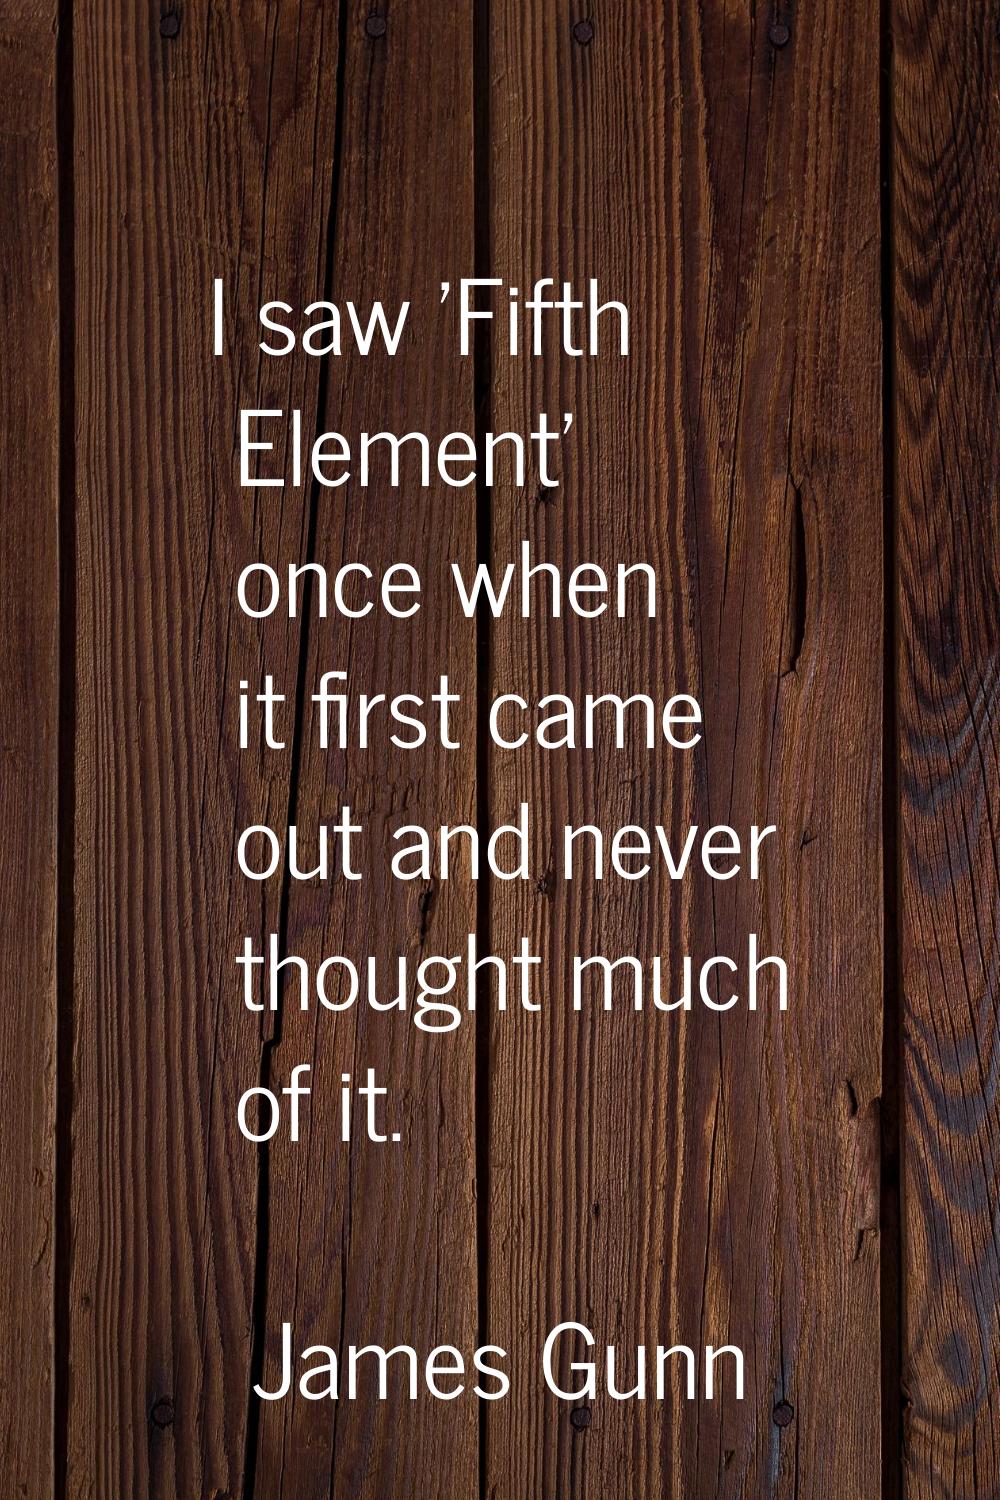 I saw 'Fifth Element' once when it first came out and never thought much of it.